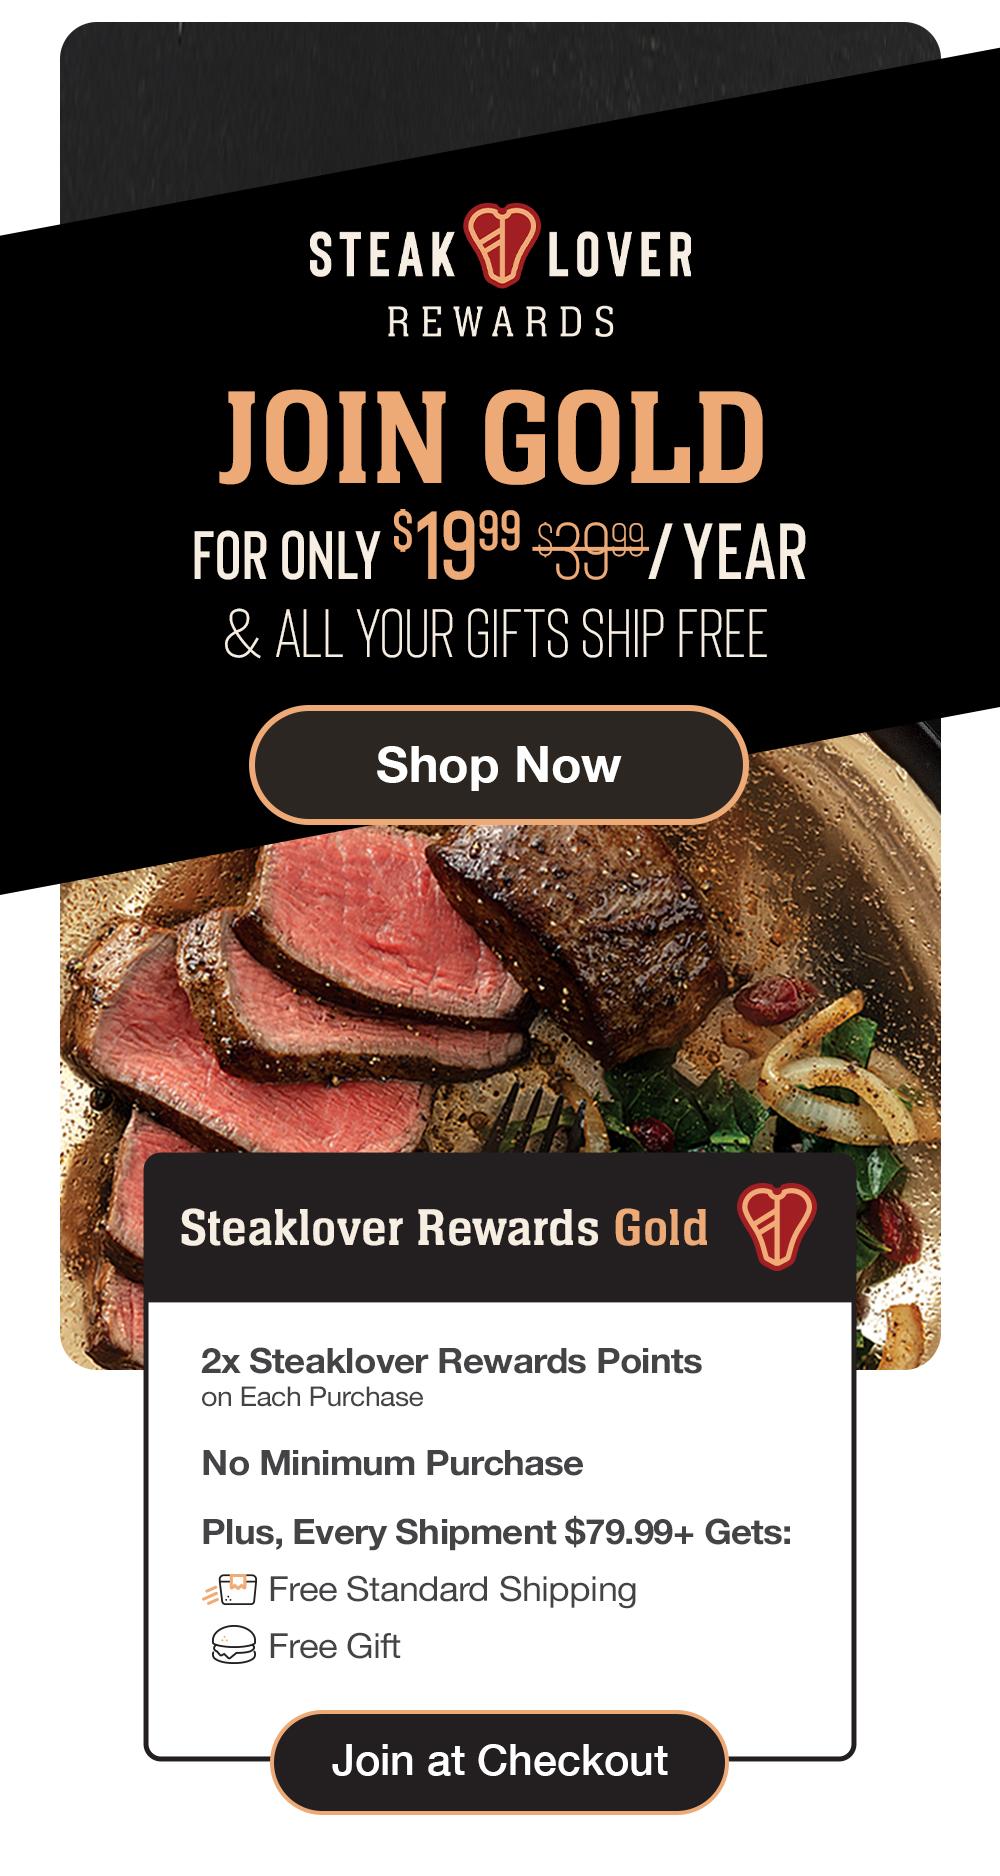 steaklover REWARDS | FOR ONLY $19.99/YEAR - Become a member of our exclusive premier rewards program and delish perks! | Steaklover Rewards Gold - 2x Steaklover Rewards Points on Each Purchase - No Minimum Purchase - Plus, Every Shipment $79.99+ Gets: Free Standard Shipping - Free Gift || Join at Checkout